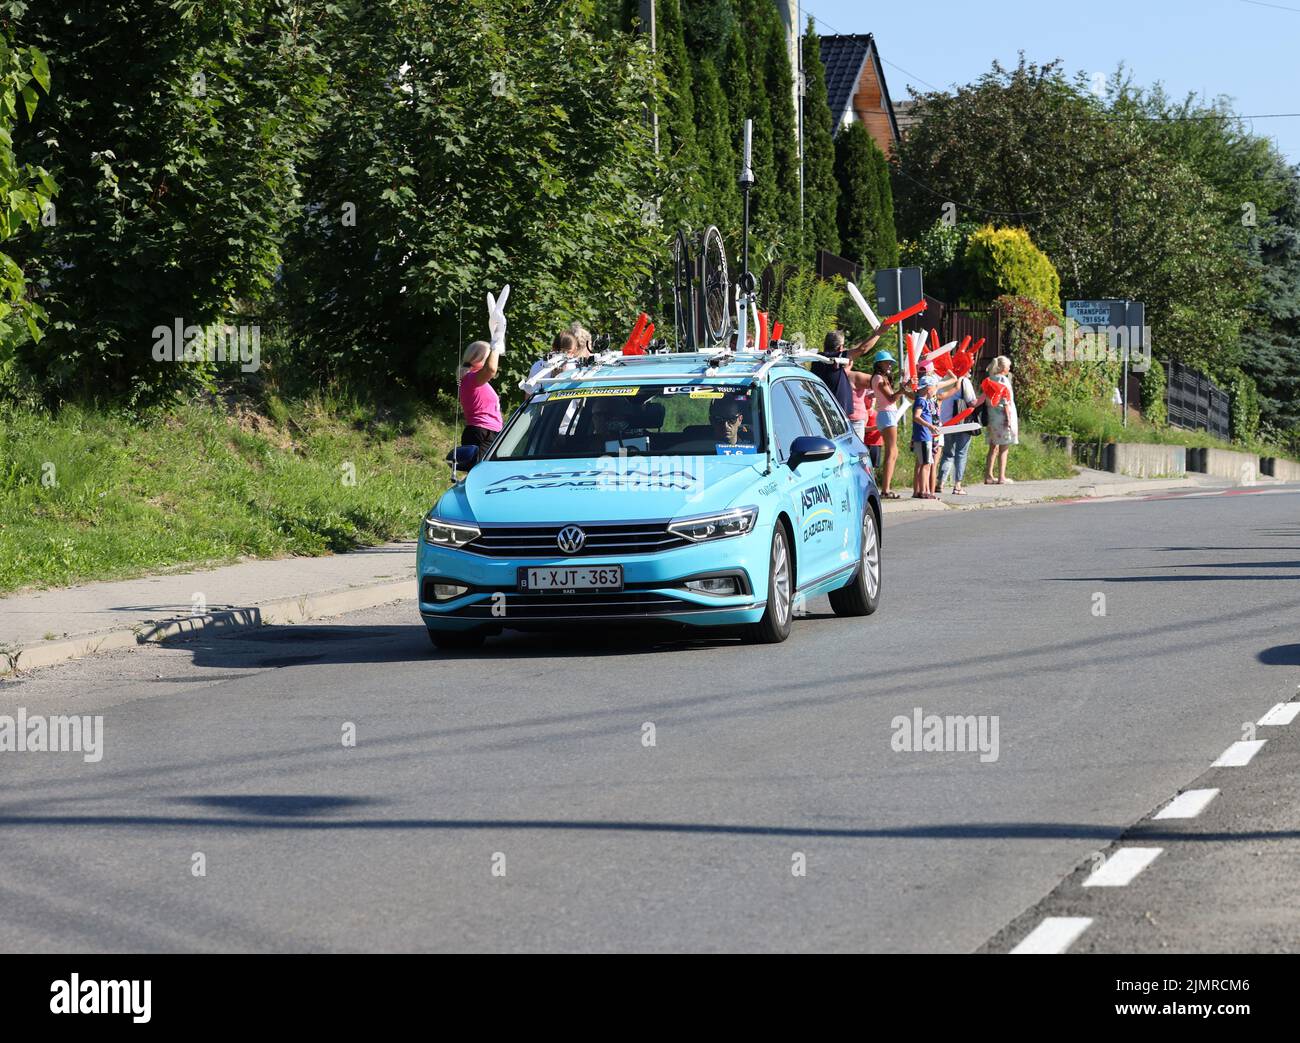 Krakow, Poland - August 5, 2022:  Astana Team vehicle on the route of Tour de Pologne UCI – World Tour, stage 7 Skawina - Krakow. The biggest cycling event in Eastern Europe. Stock Photo